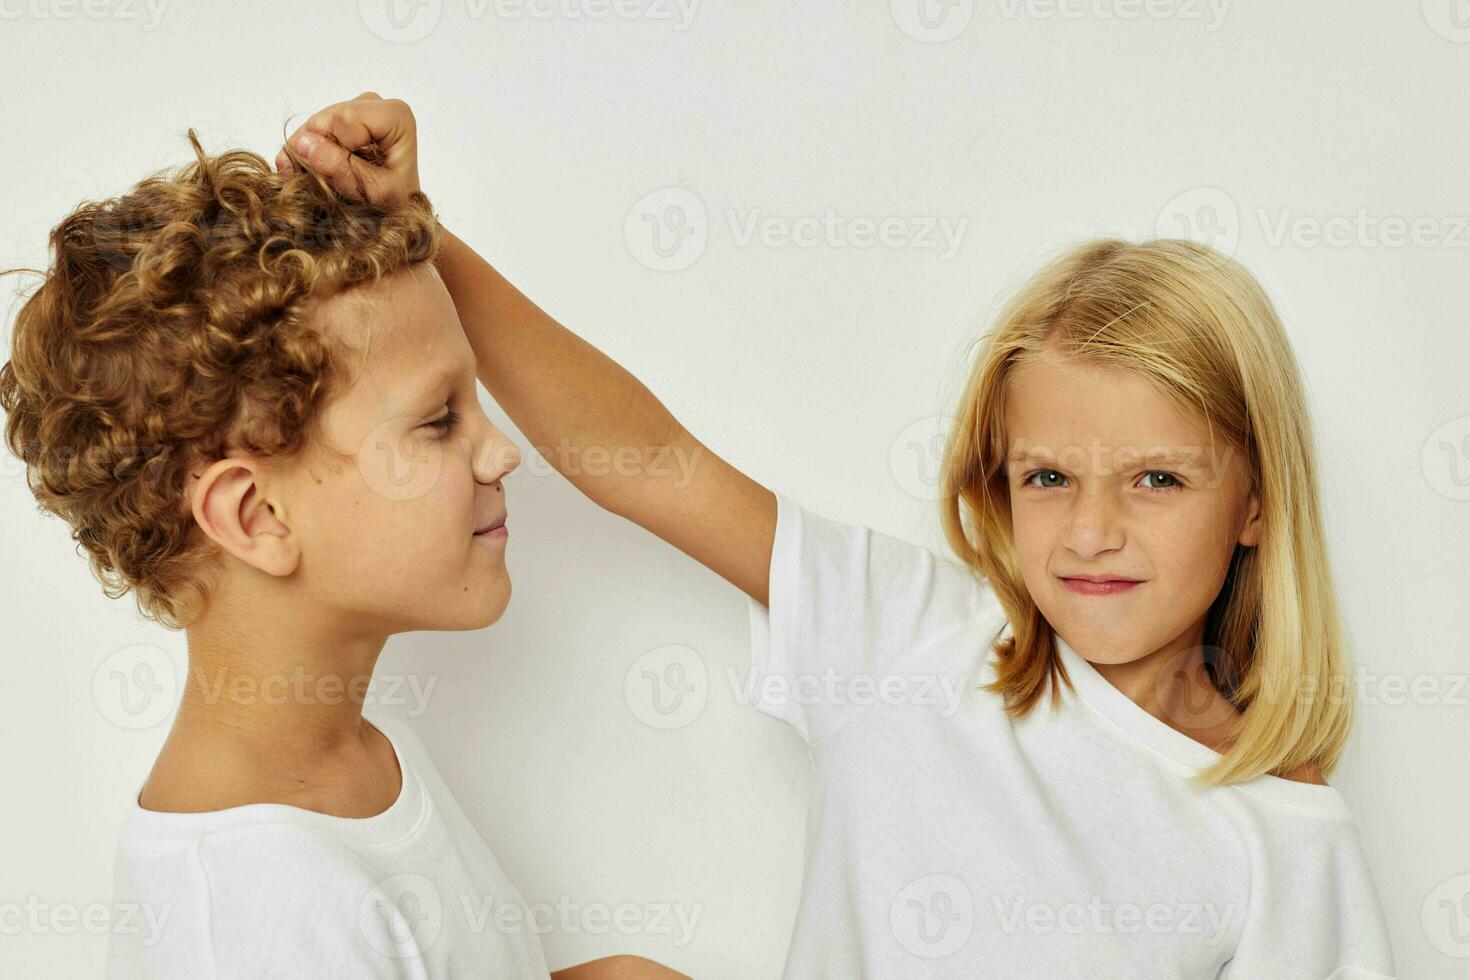 Cute stylish children in white T-shirts are standing next to Lifestyle unaltered photo